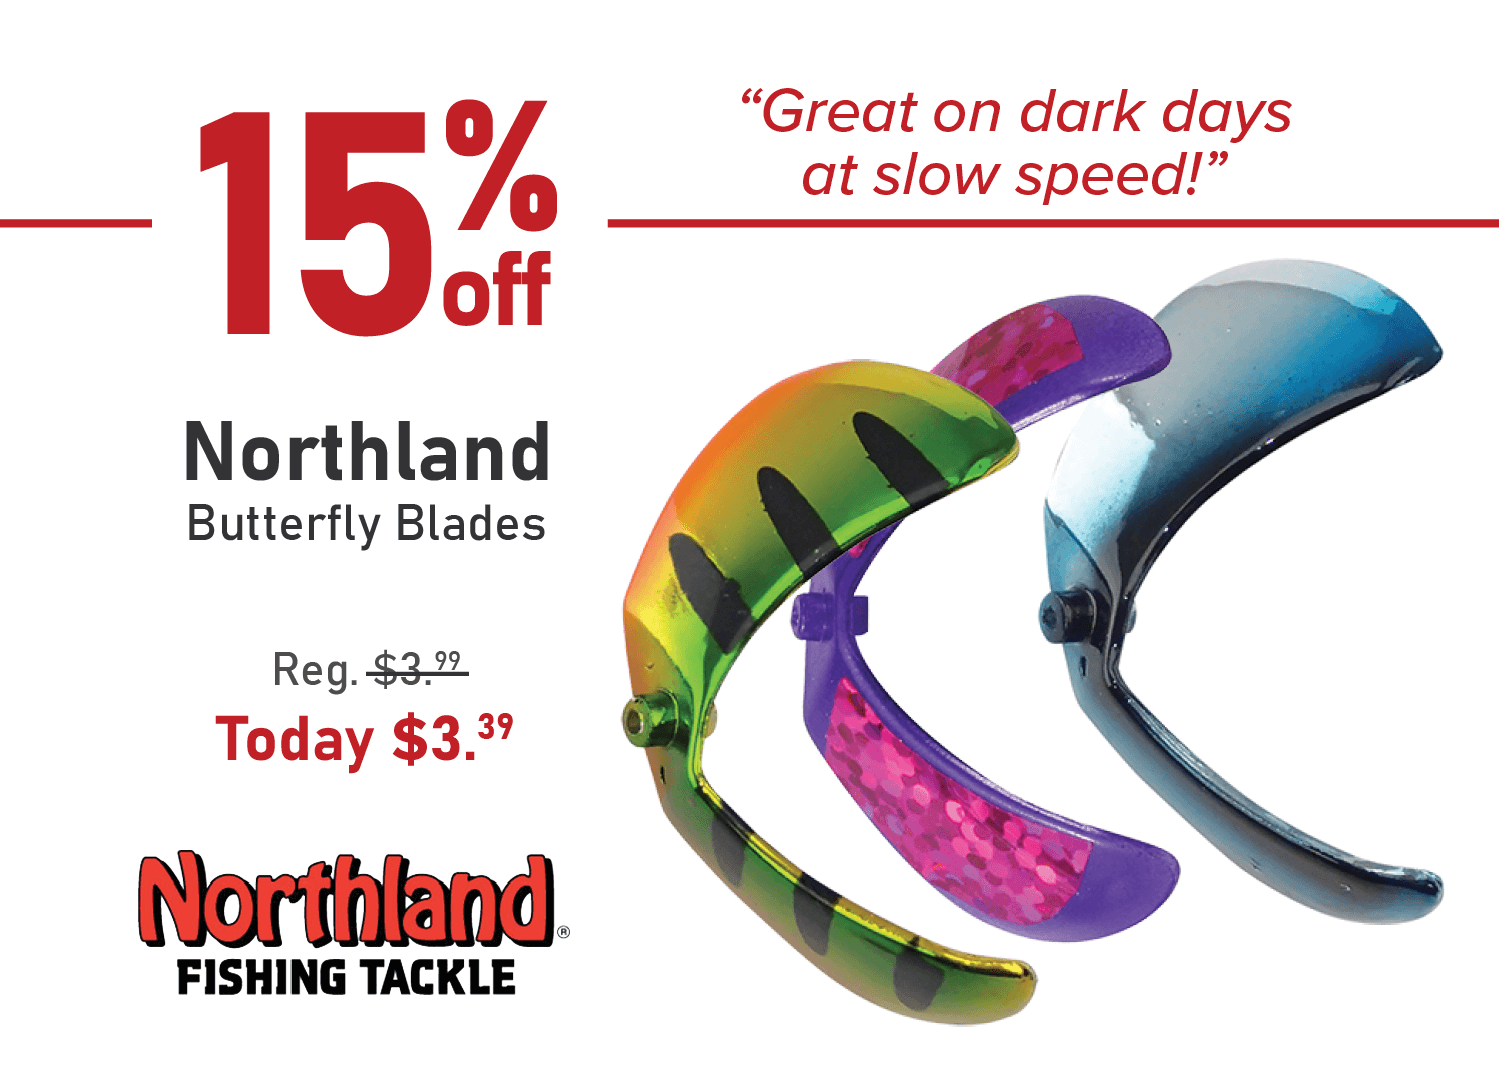 Save 15% on Northland Butterfly Blades!